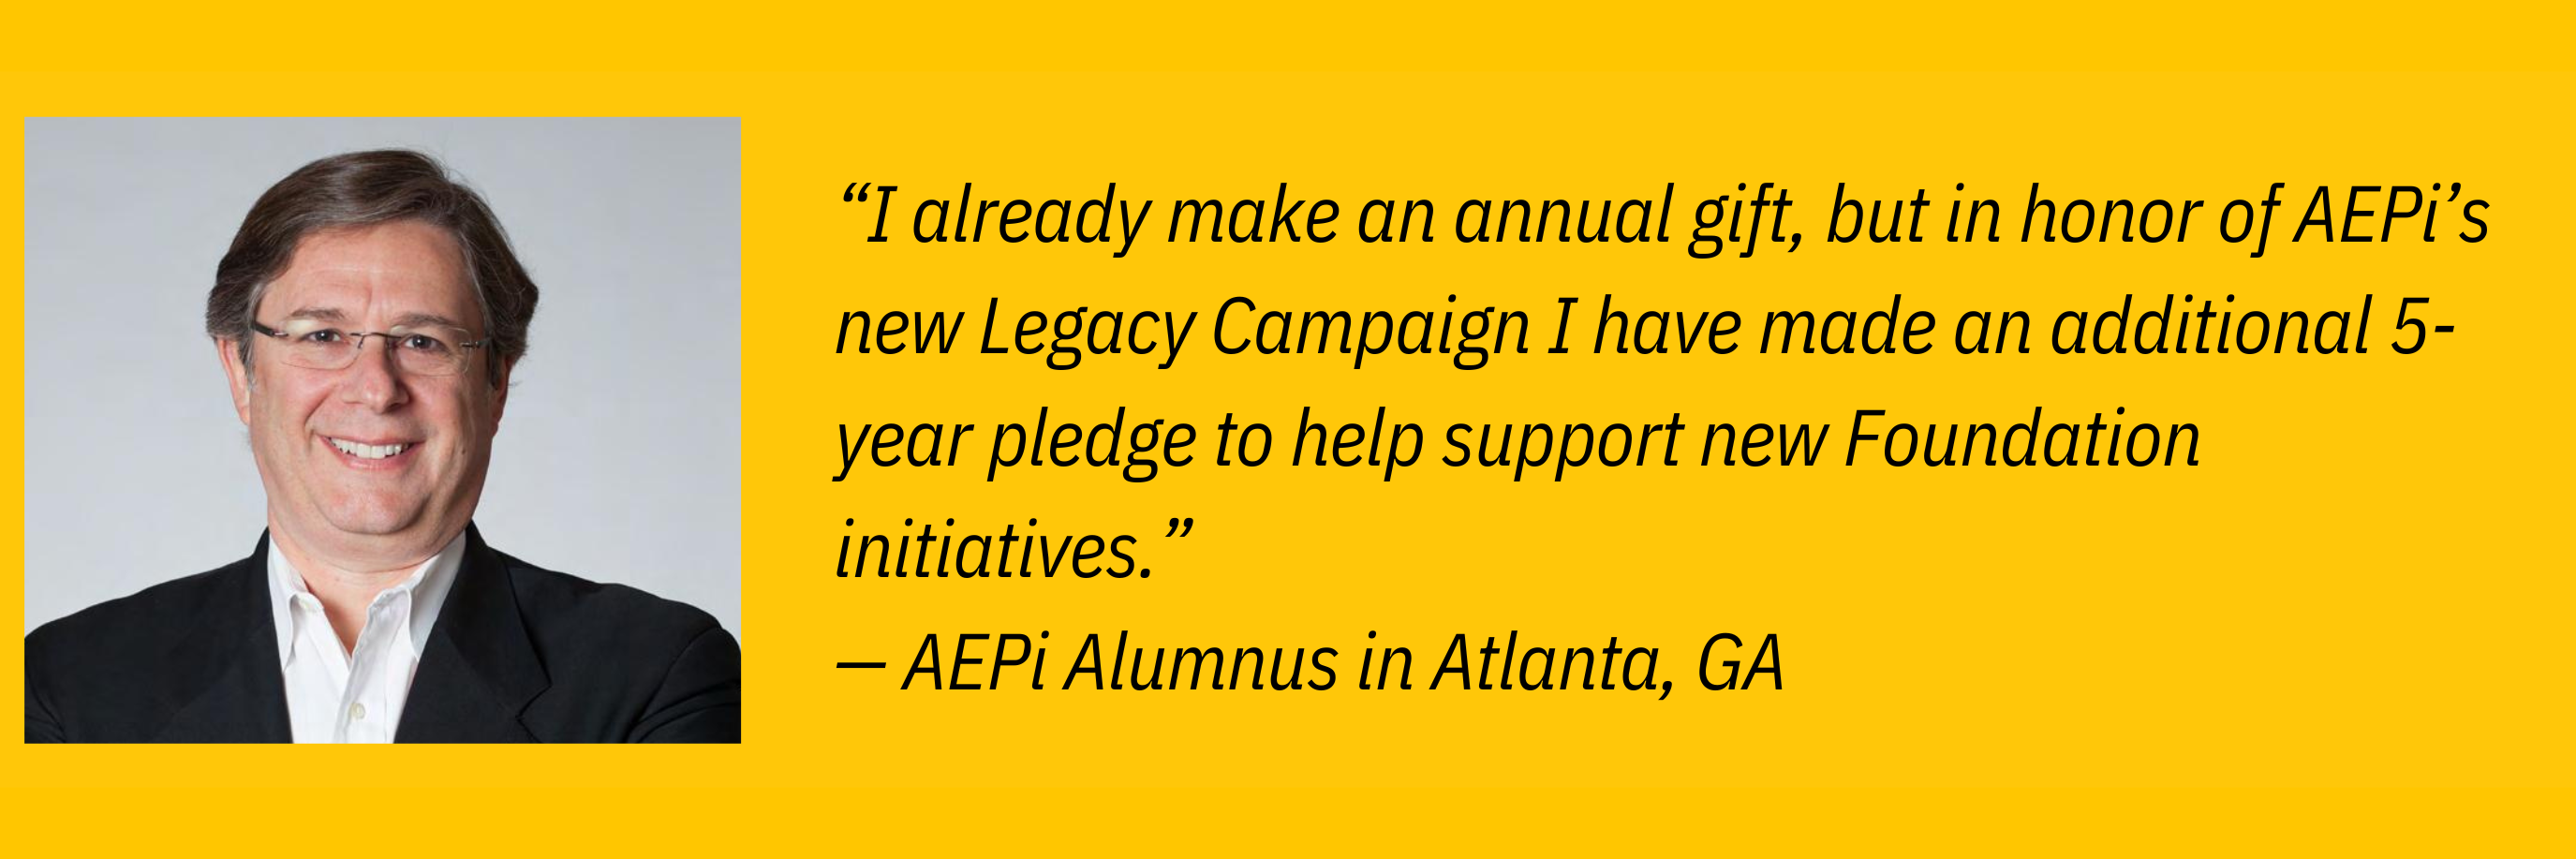 “I already make an annual gift, but in honor of AEPi’s new Legacy Campaign I have made an additional 5-year pledge to help support new Foundation initiatives.” — AEPi Alumnus in Atlanta, GA